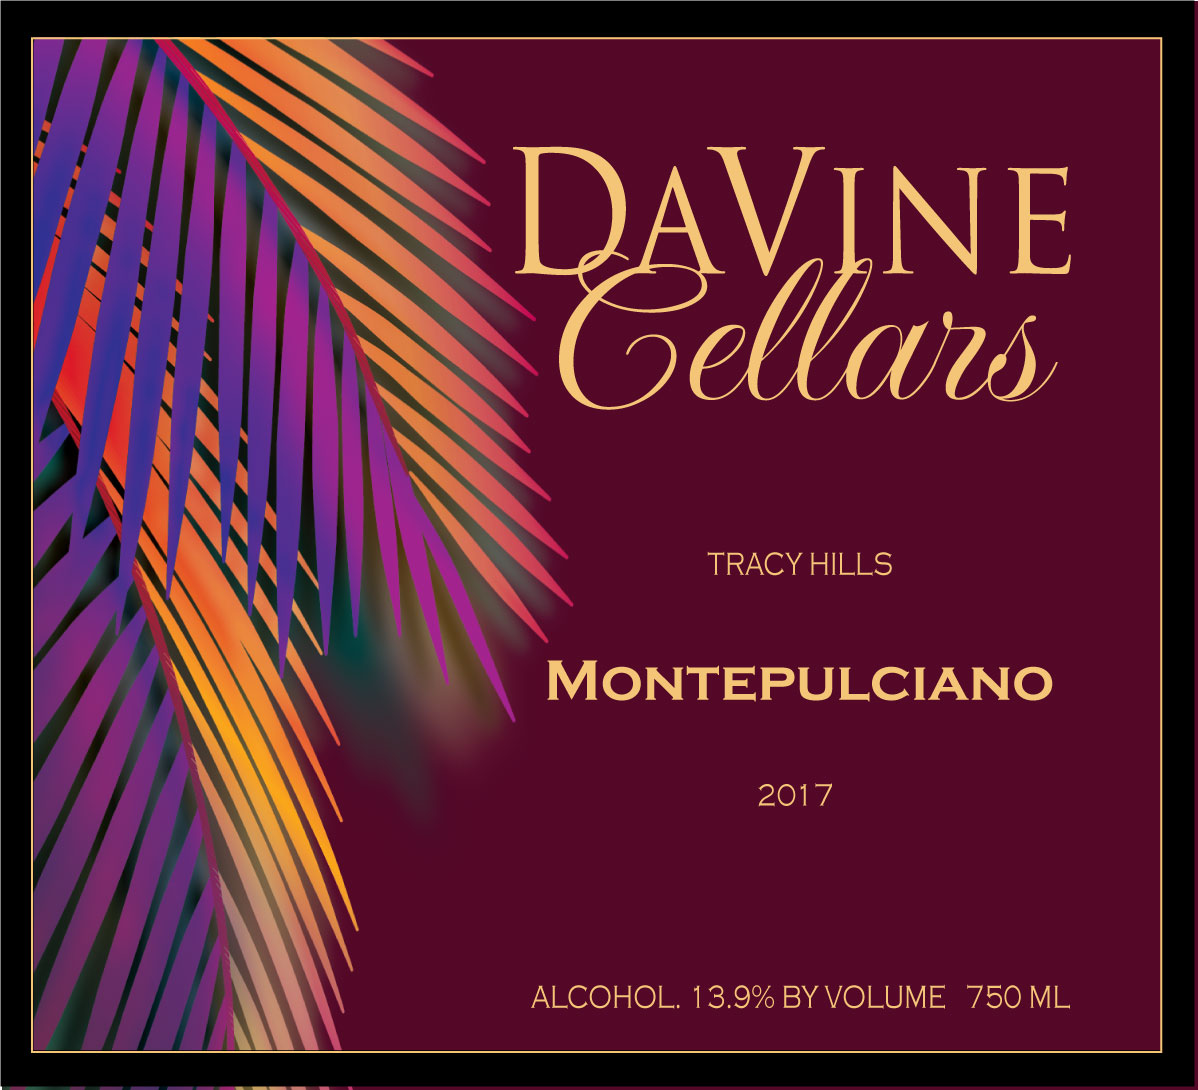 Product Image for 2017 Tracy Hills Montepulciano "Buono" 